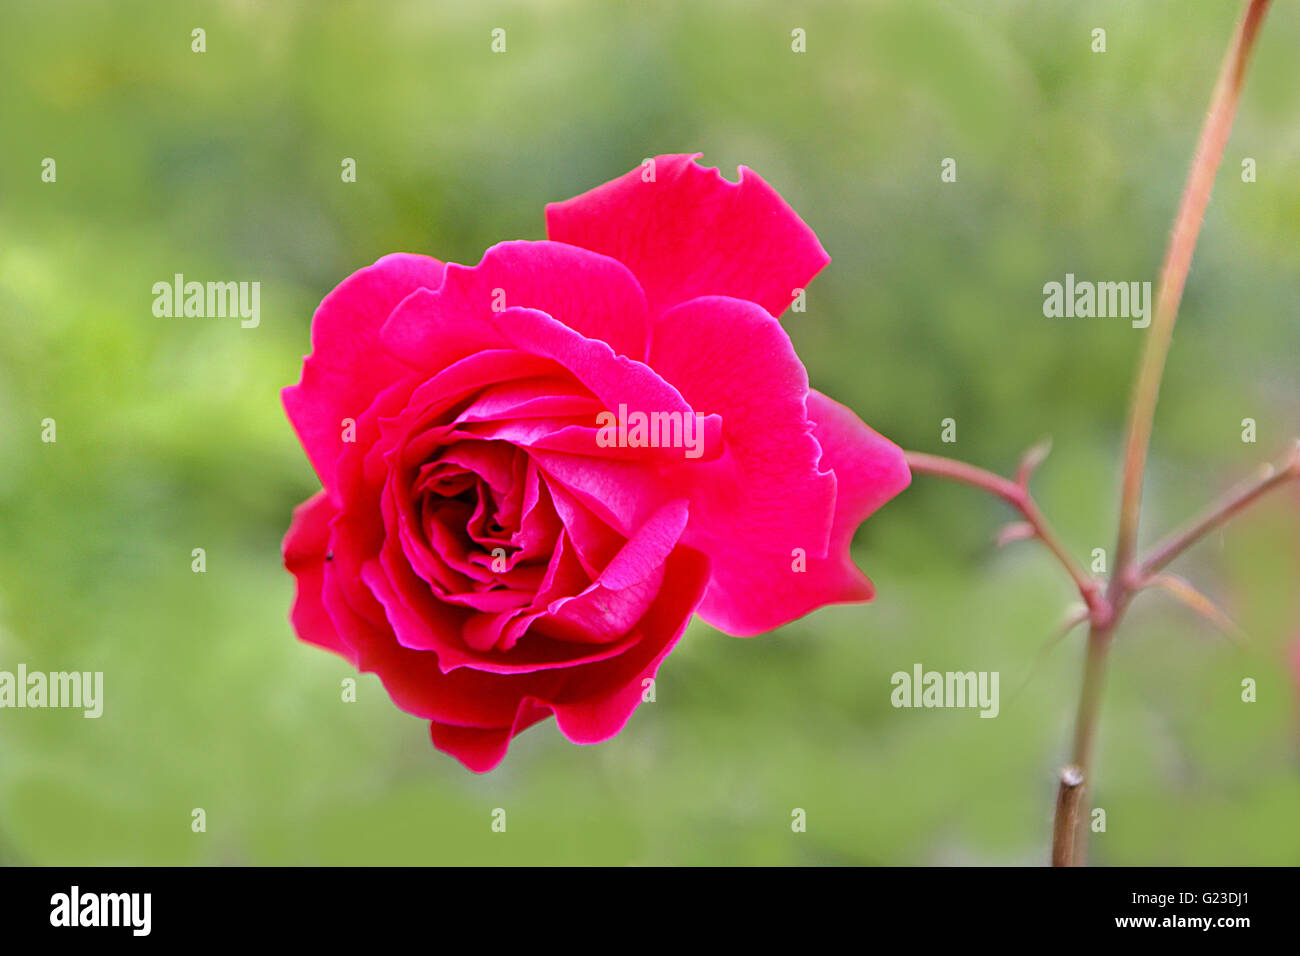 Close-up of red rose flower on blurred green background Stock Photo